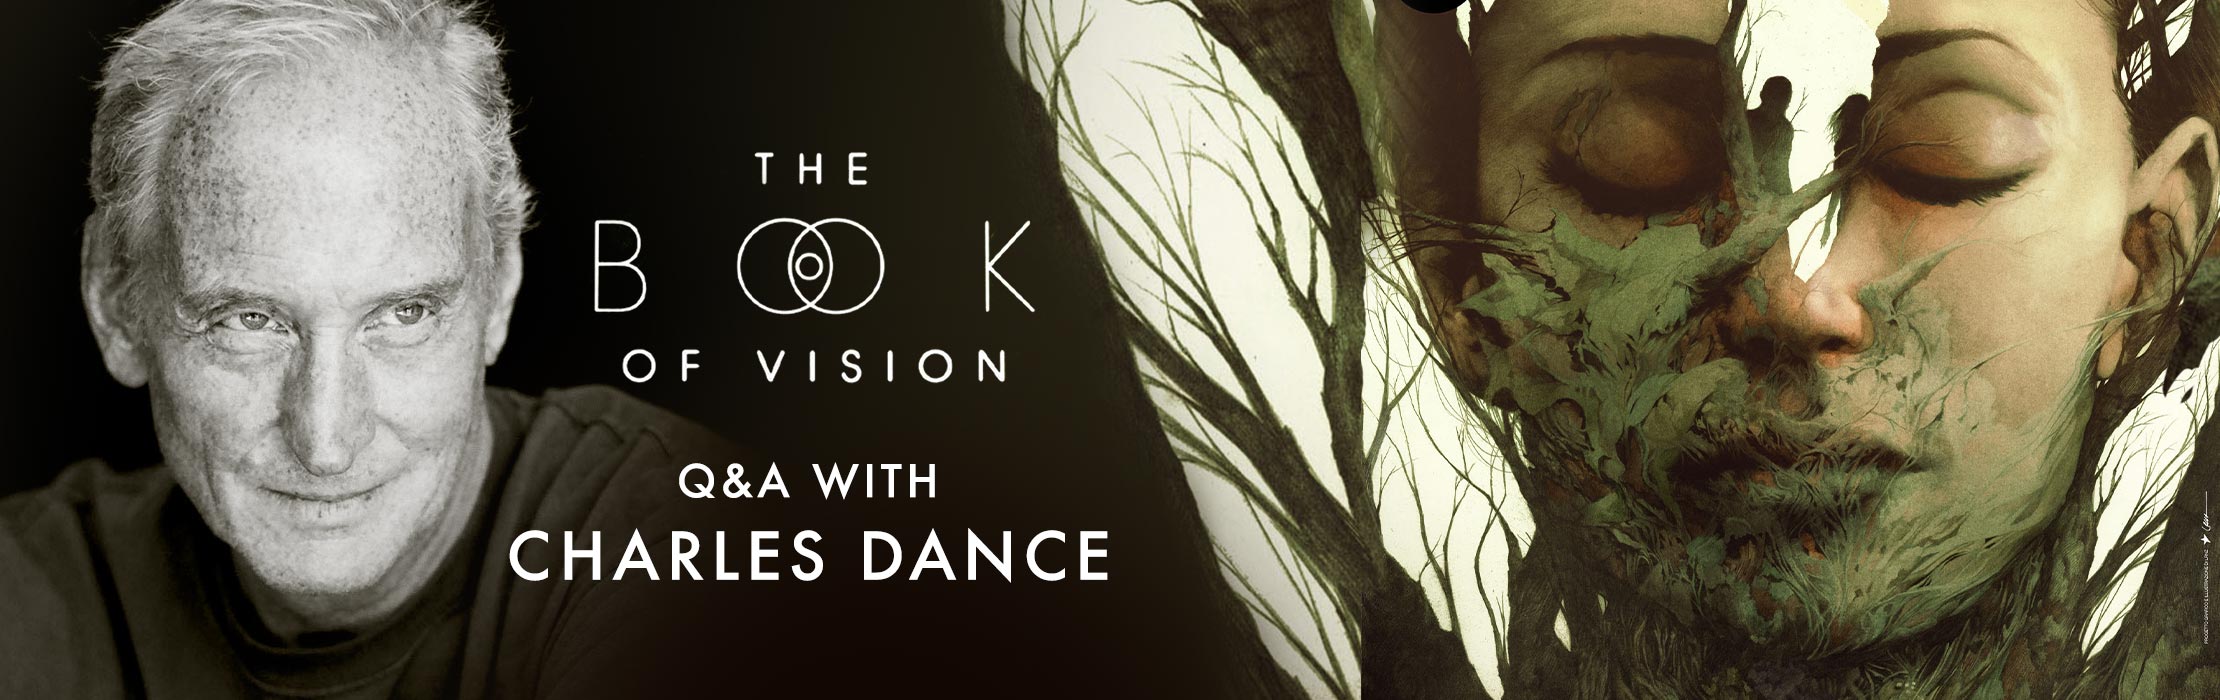 The Book of Vision QA with Charles Dance